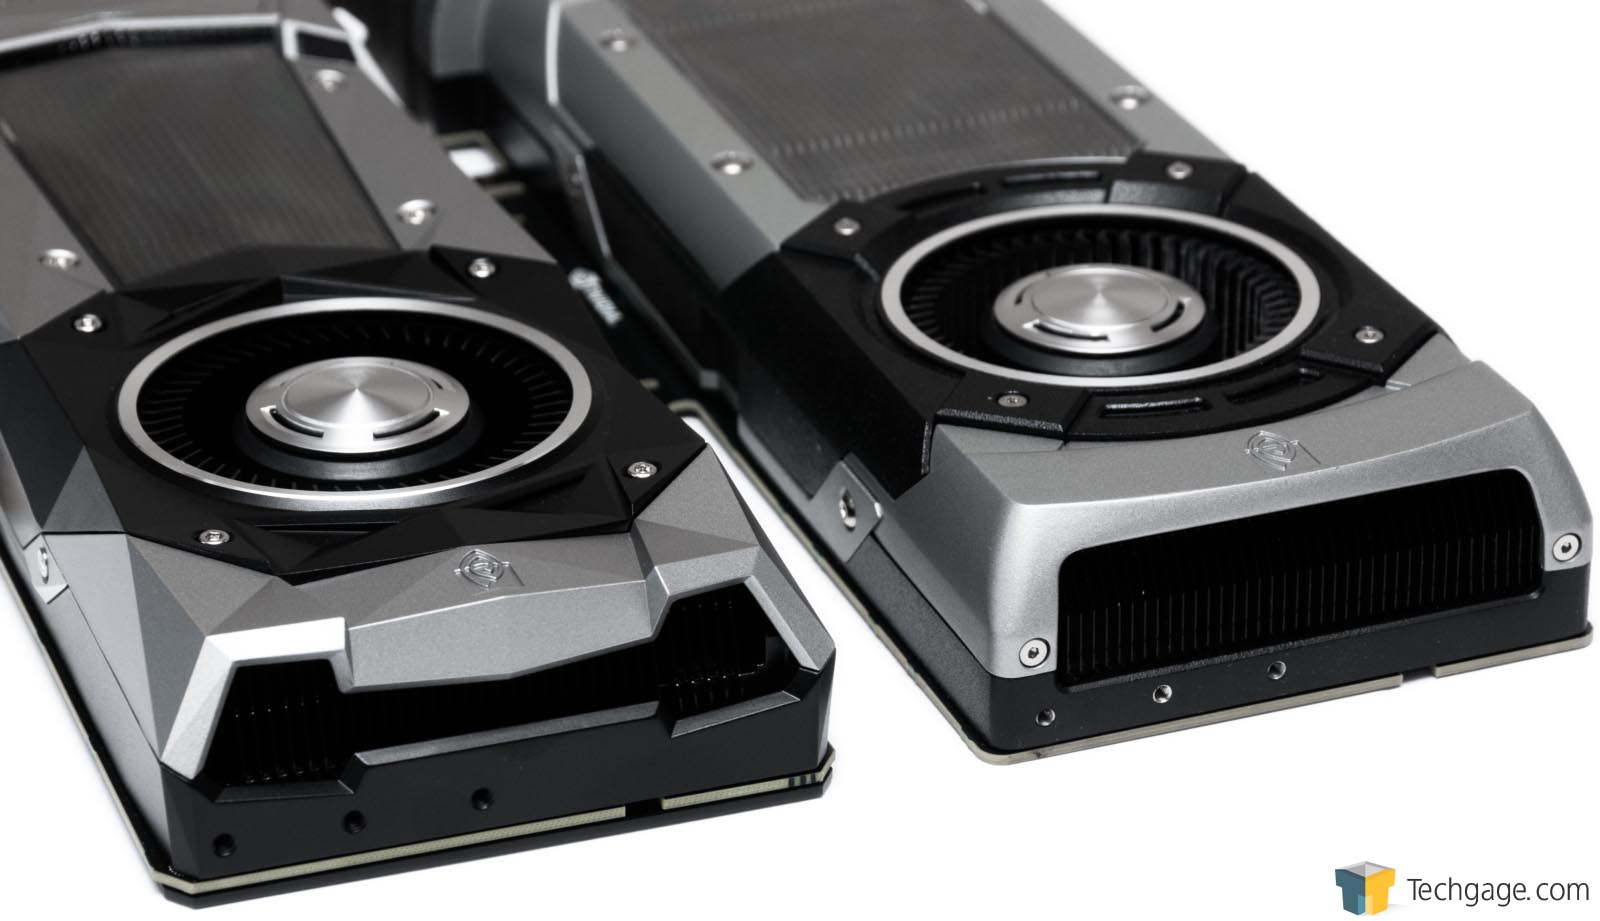 NVIDIA GeForce GTX 1080 Review: A Look At 4K & Ultra-wide Gaming – Techgage